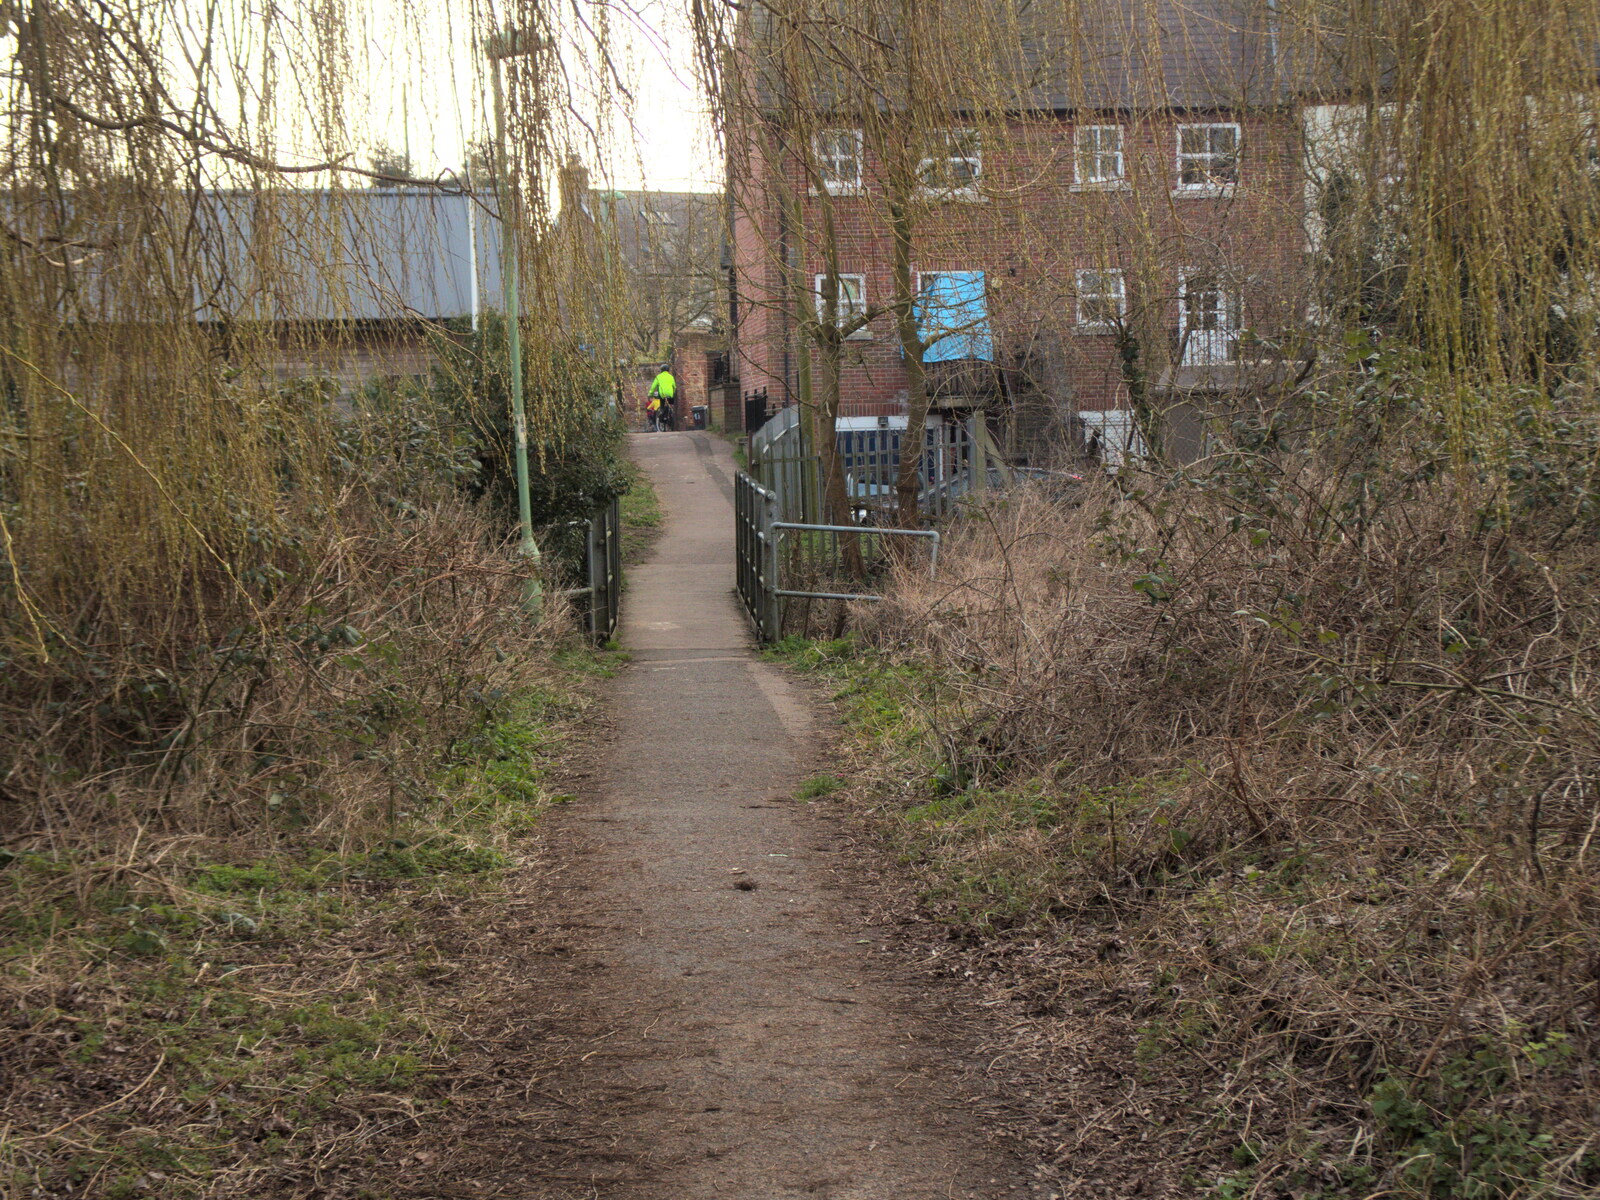 The footbridge over the stream from The Mean Streets of Eye, Suffolk - 7th March 2021